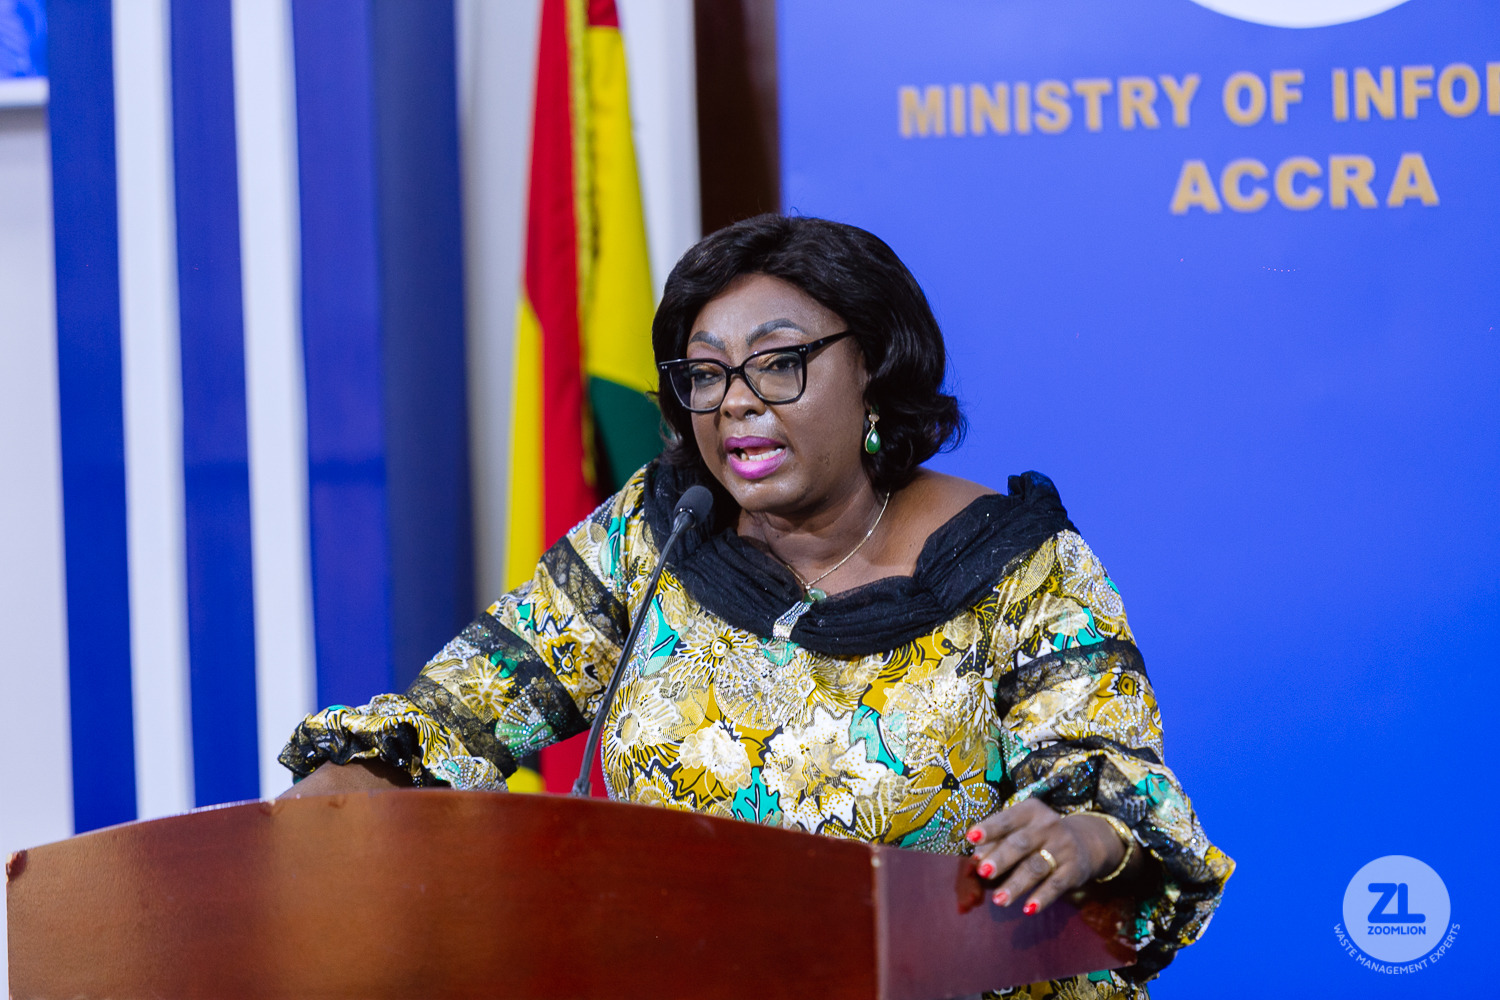 Sanitation Minister emphasizes importance of IRECOPs to manage Ghana’s solid waste